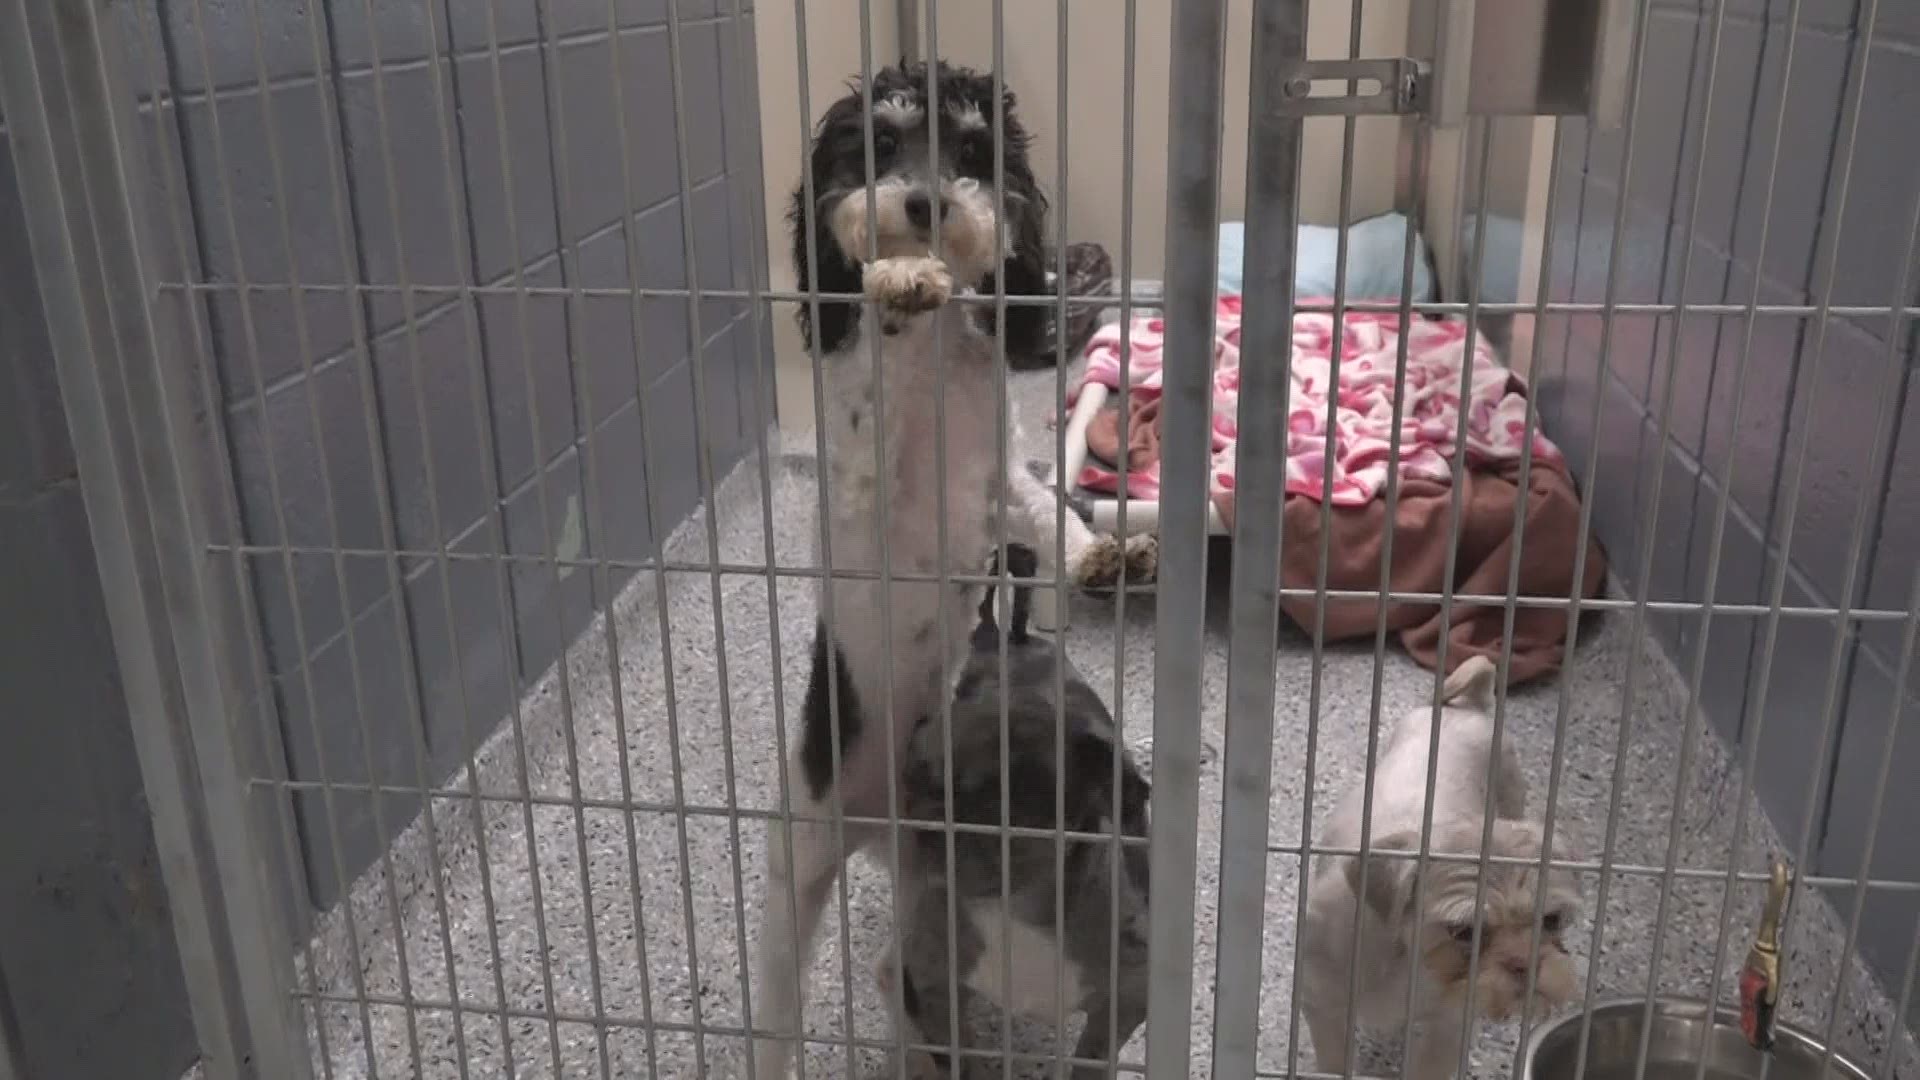 More than 100 dogs were rescued from the puppy mill and 20 of them came to Harbor Humane Society.